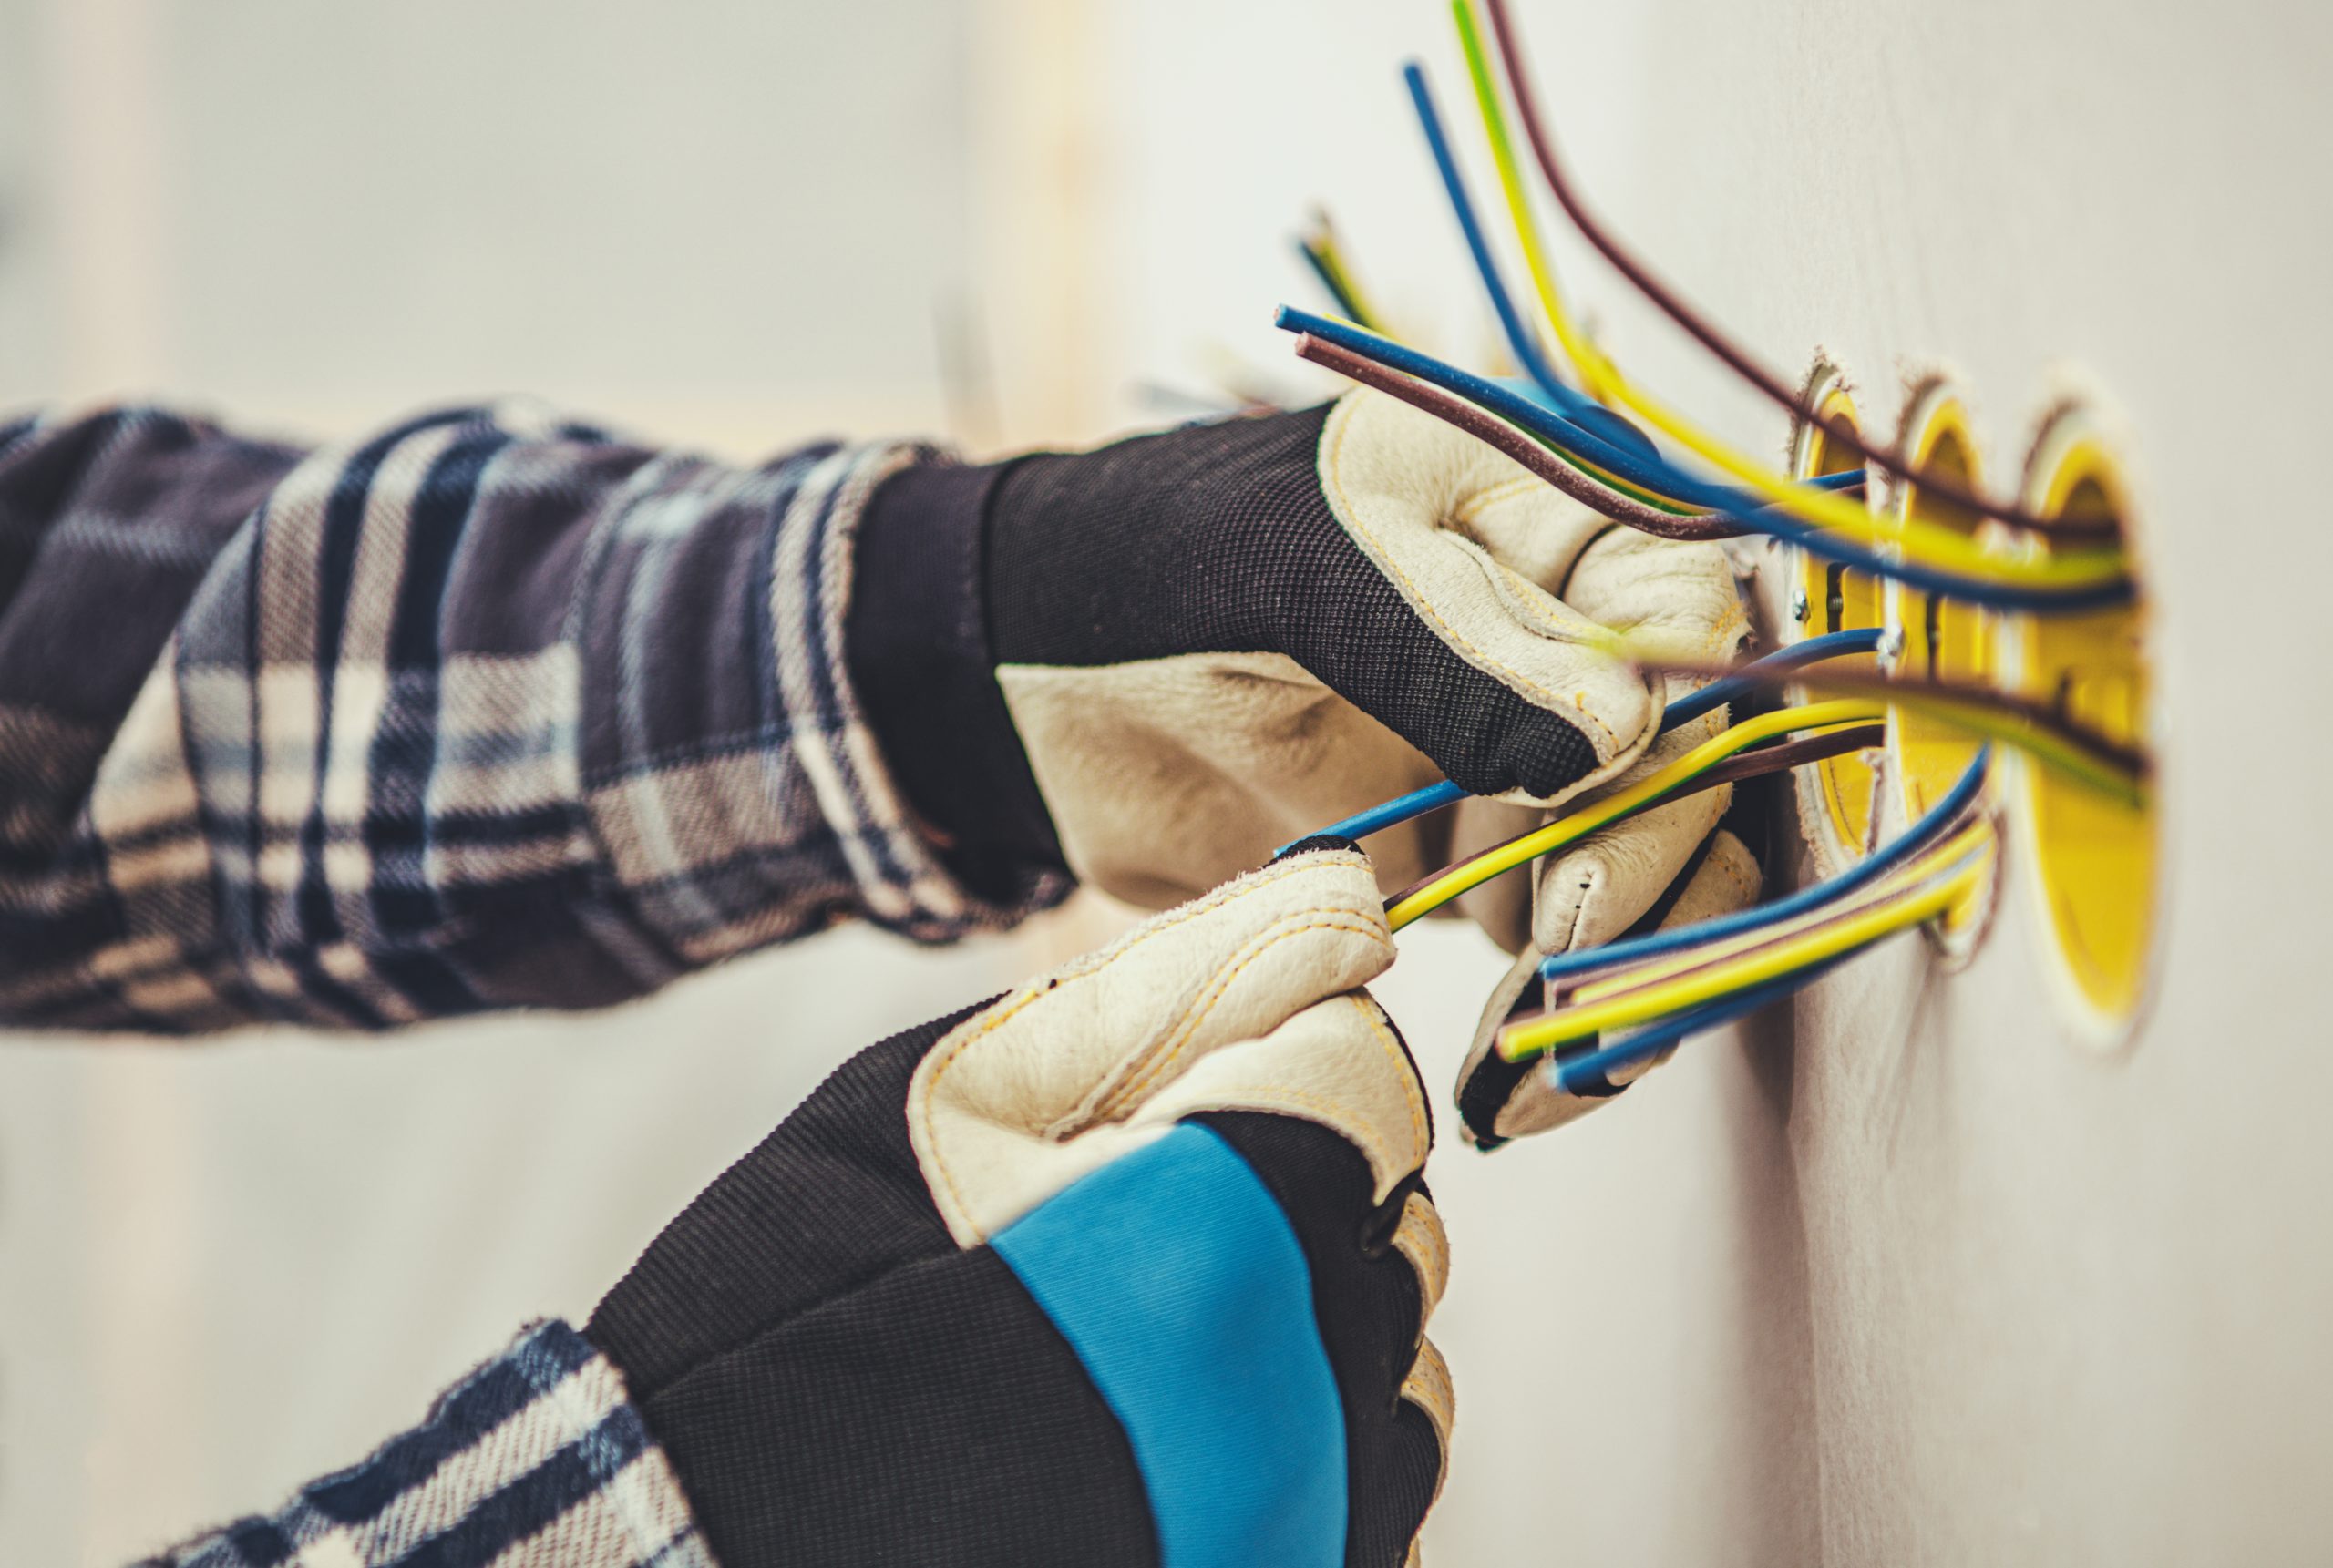 Electrician Working With Wires Background Image